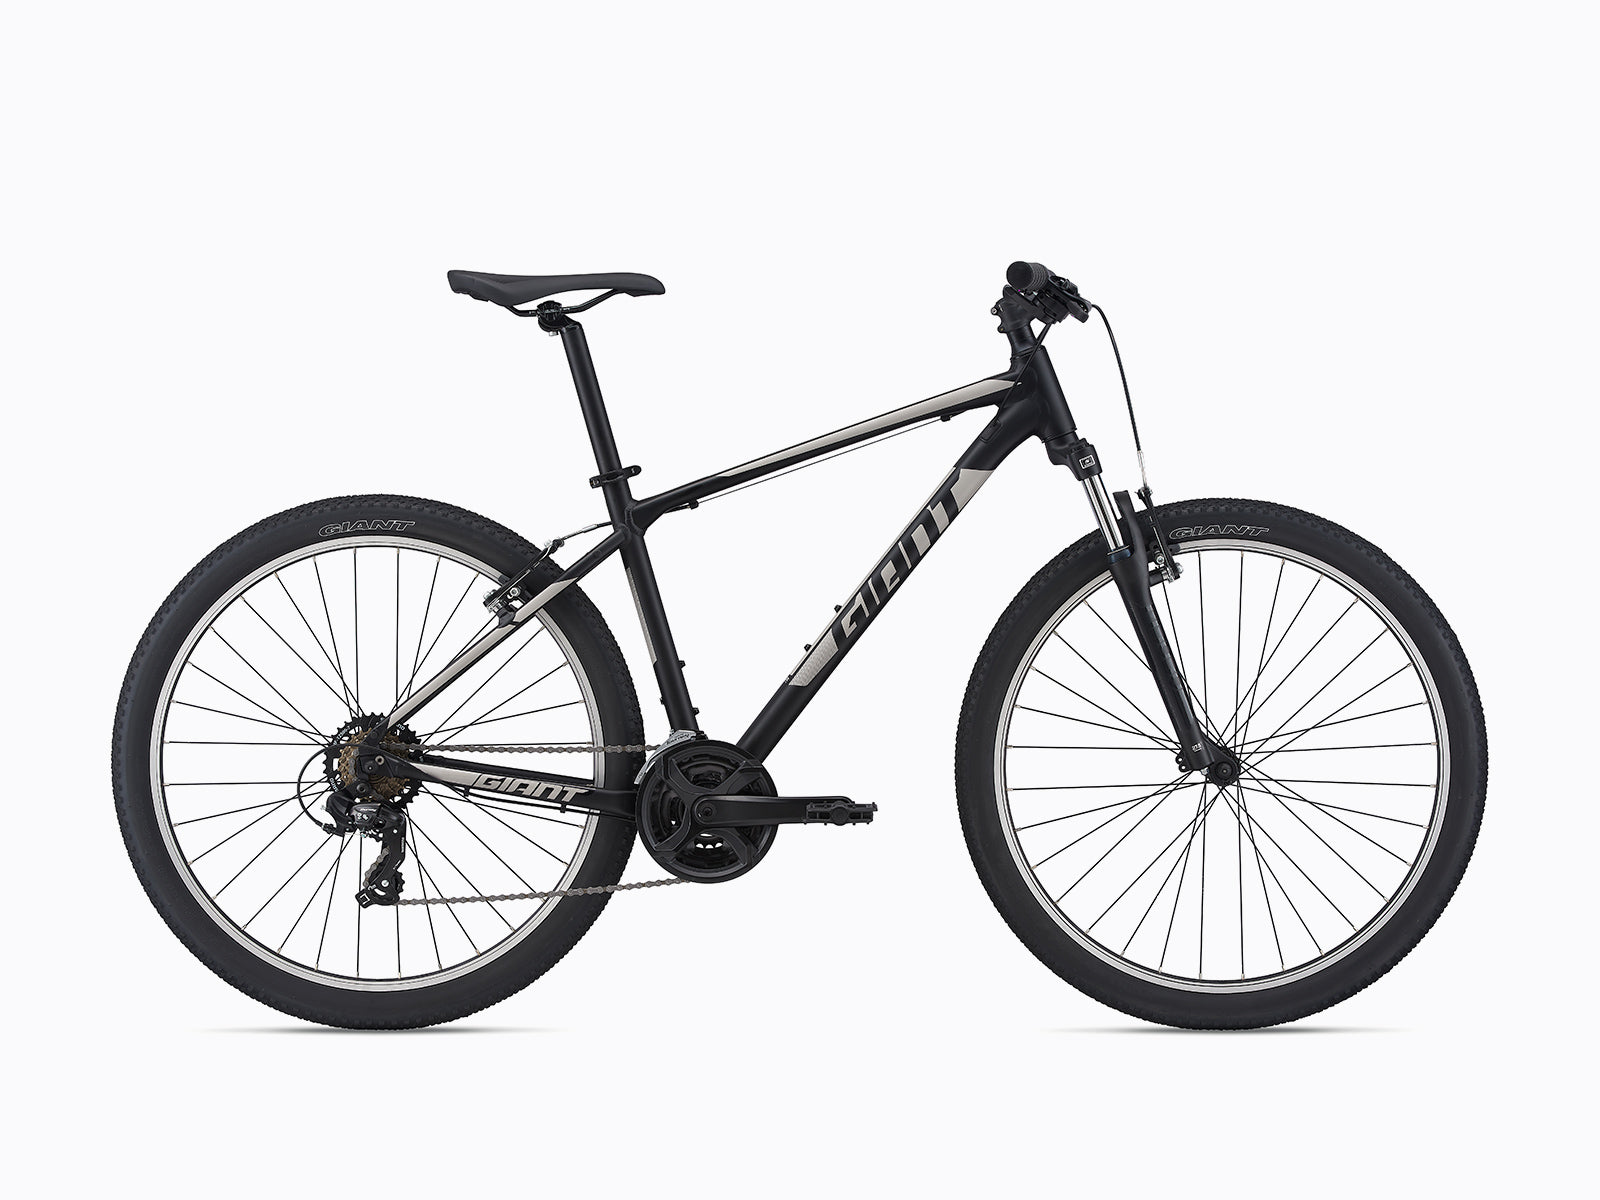 image features a giant ATX 27.5 hardtail mountain bike thats designed for confirdent smooth riding on dirt surfaces and city bike paths. currently this bike is on sale